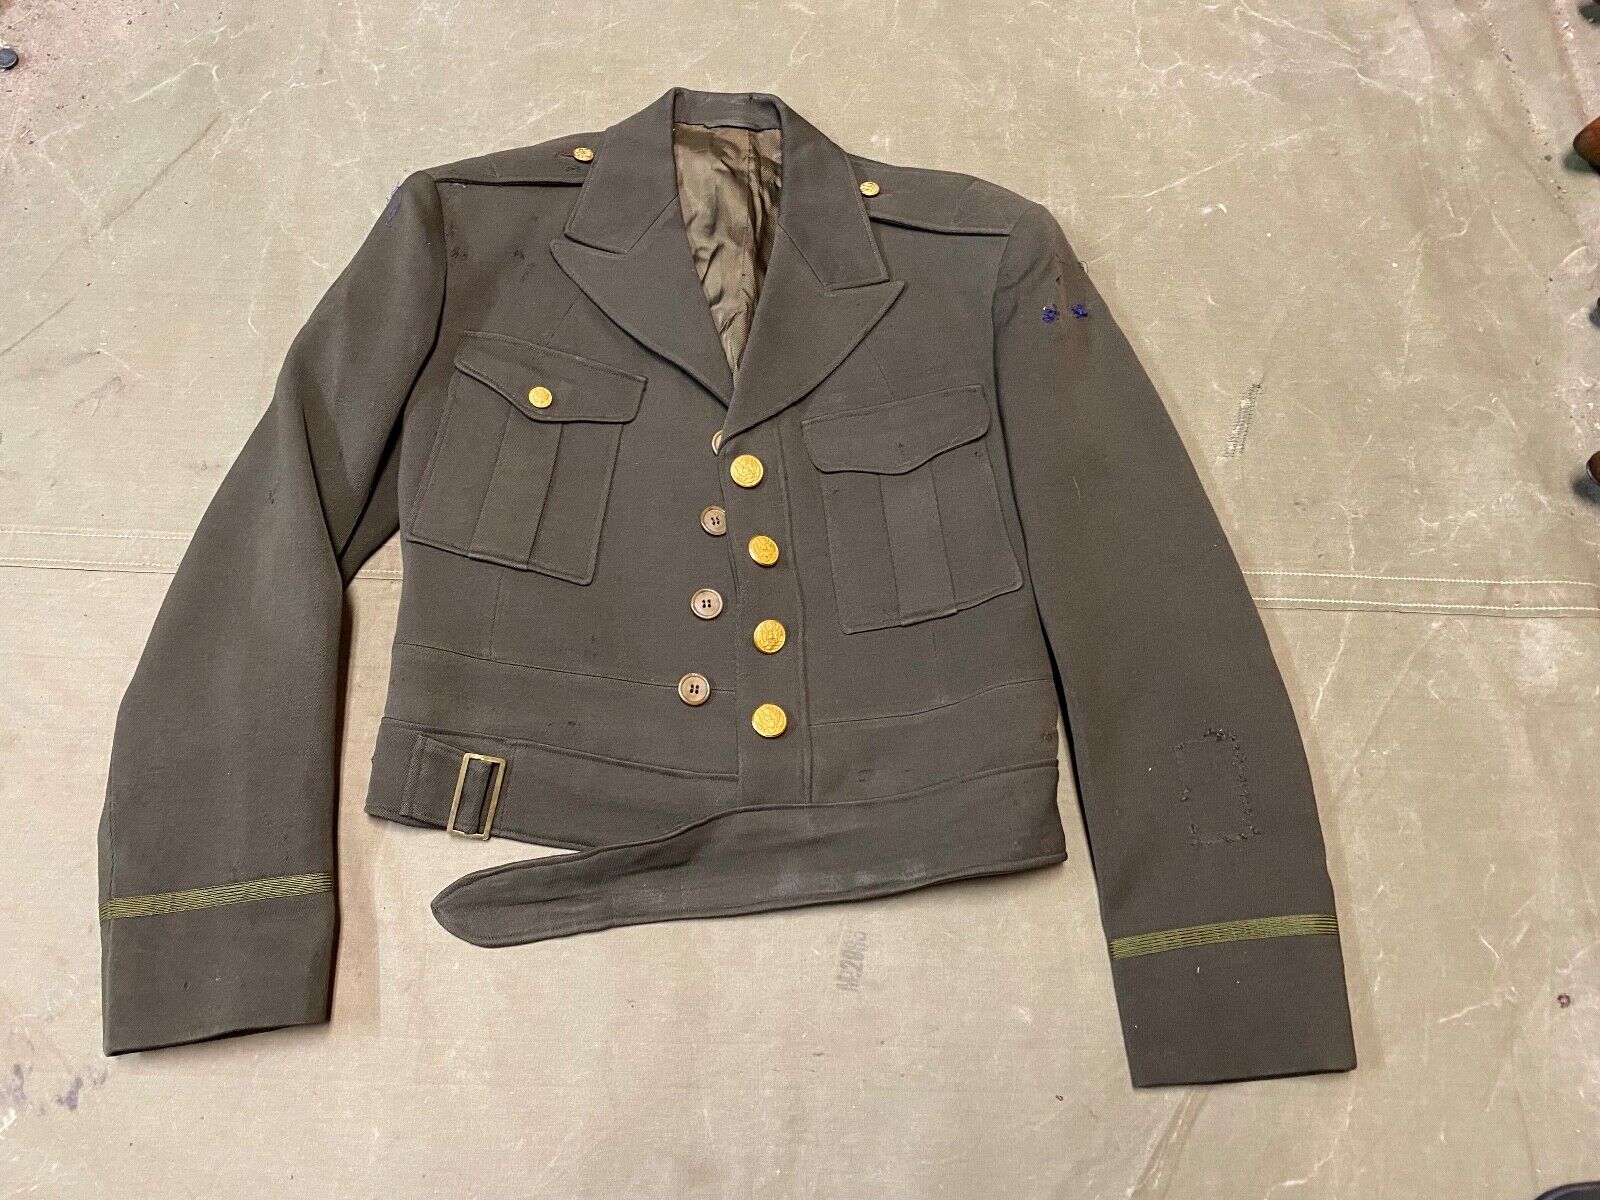 ORIGINAL WWII US ARMY OFFICER M1944 CLASS A IKE JACKET- SMALL 38R